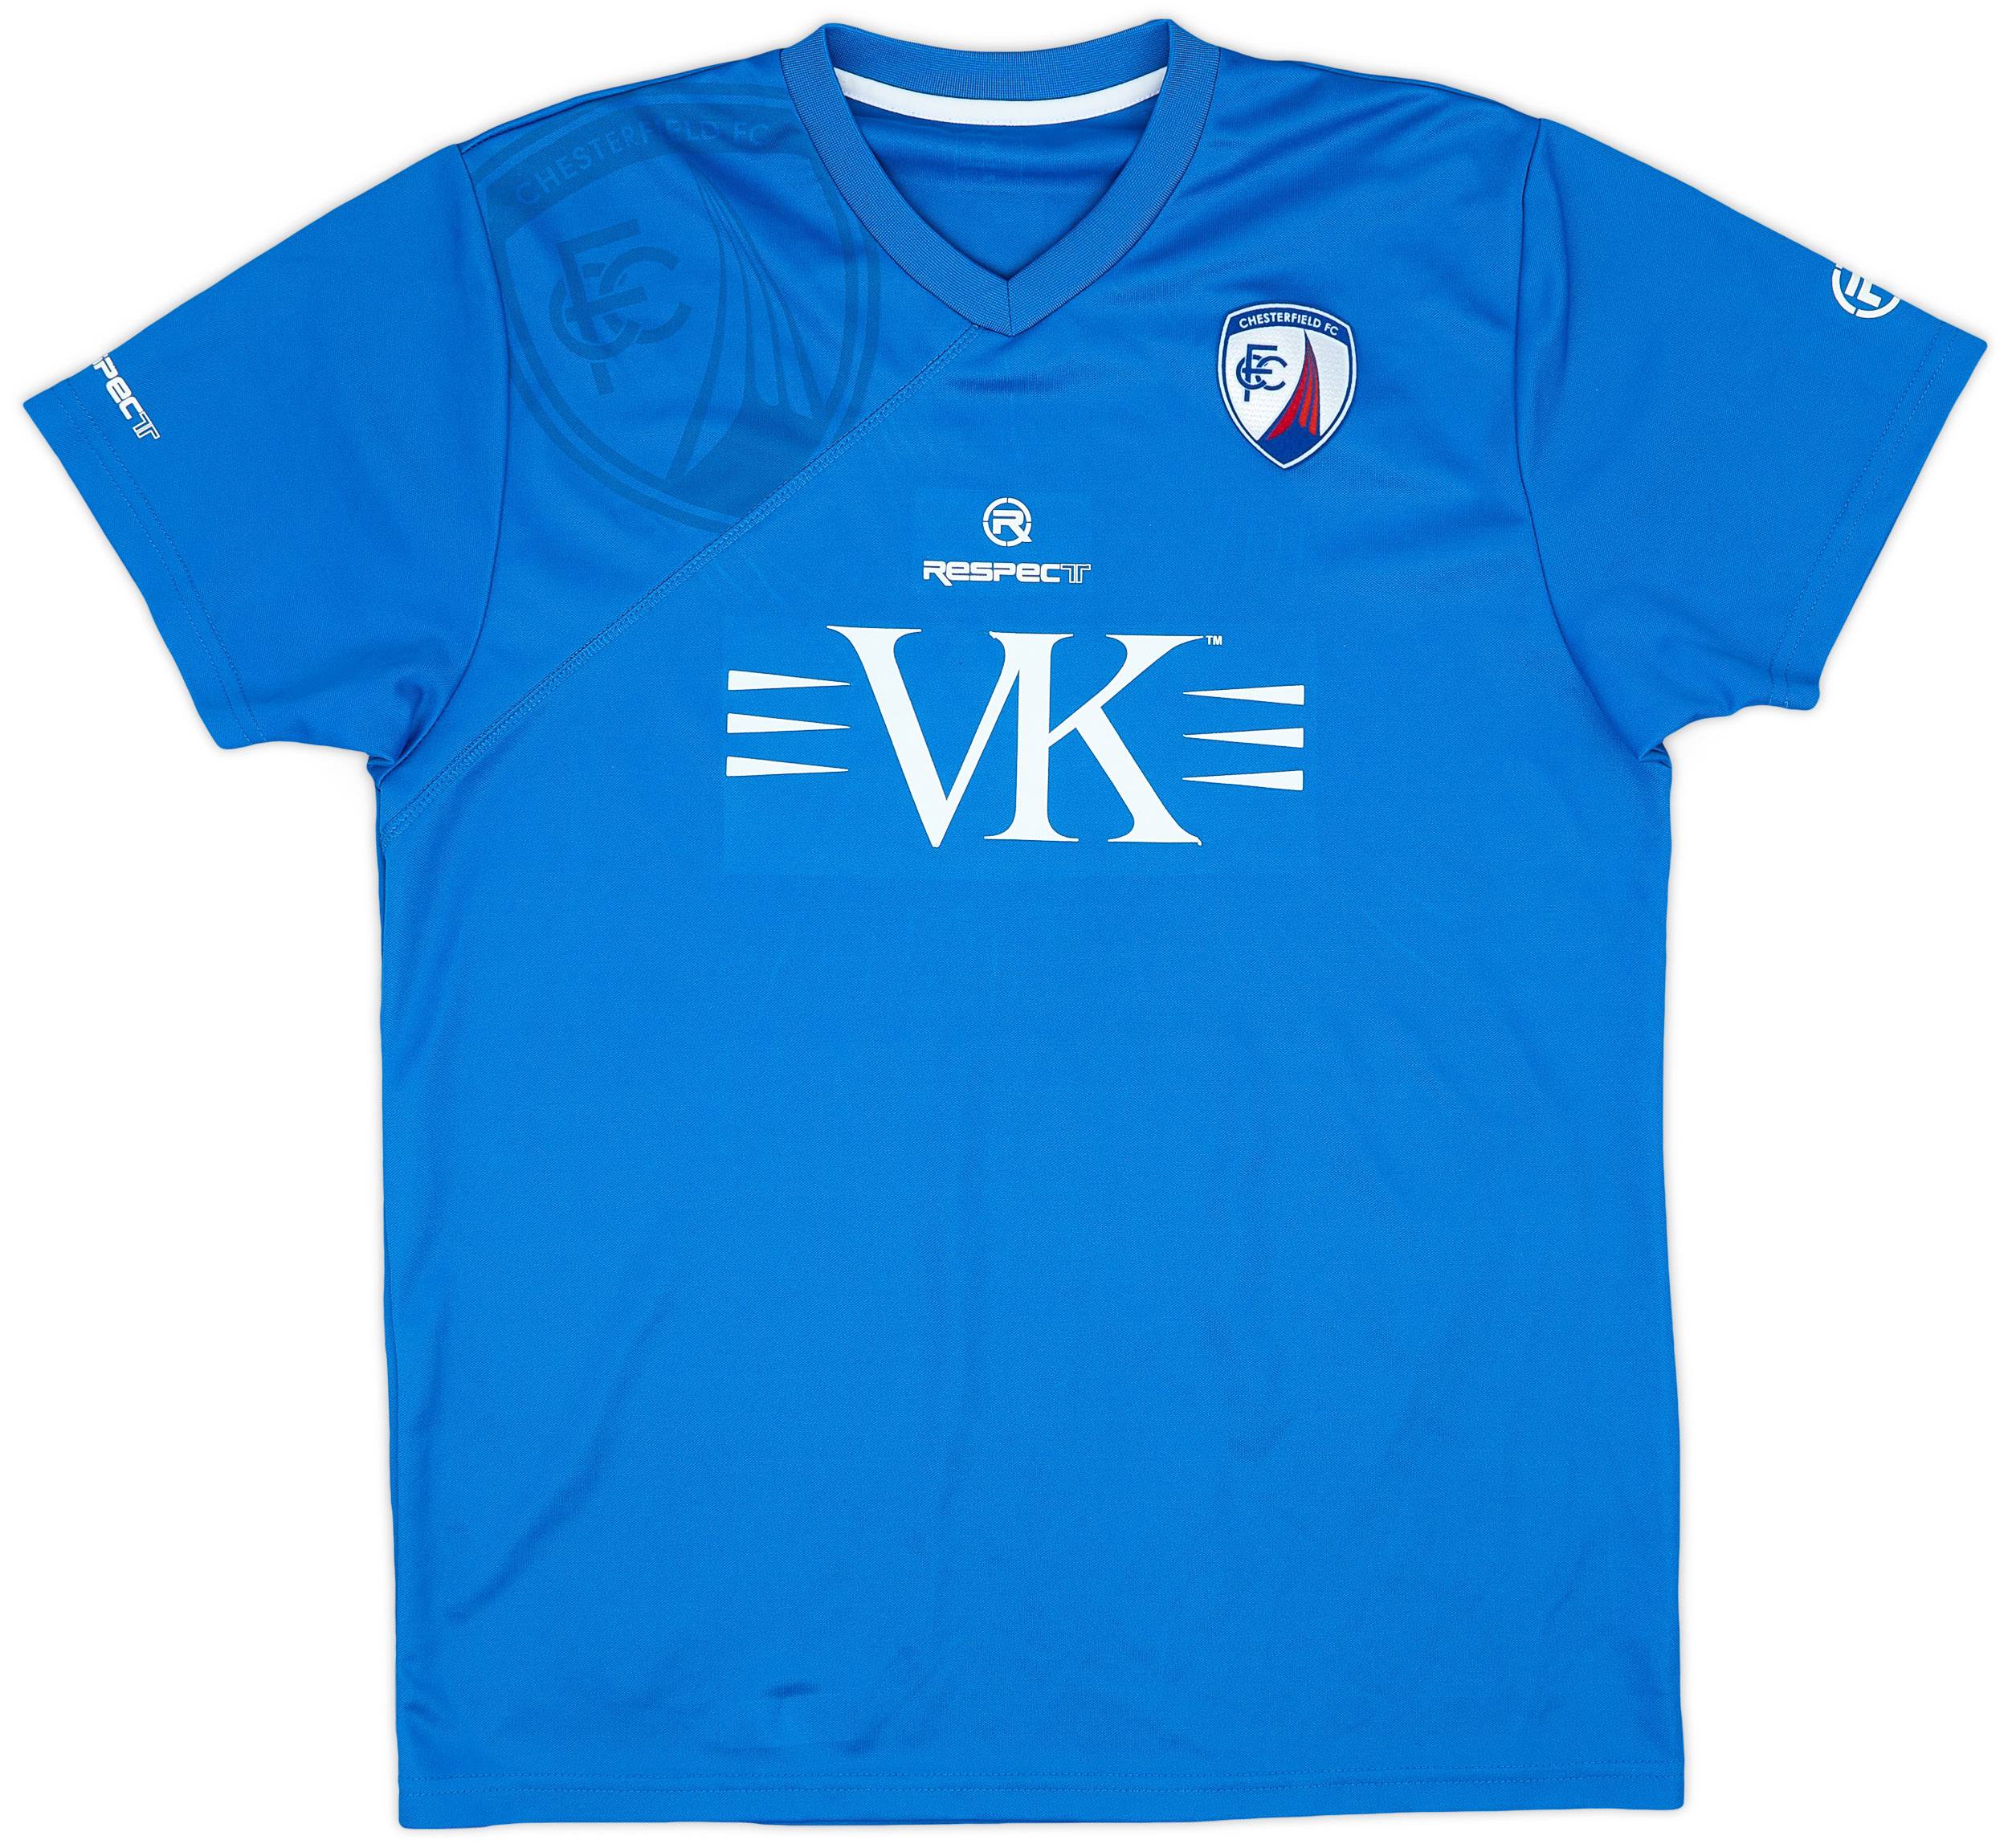 2010-11 Chesterfield Home Shirt - 8/10 - (L)